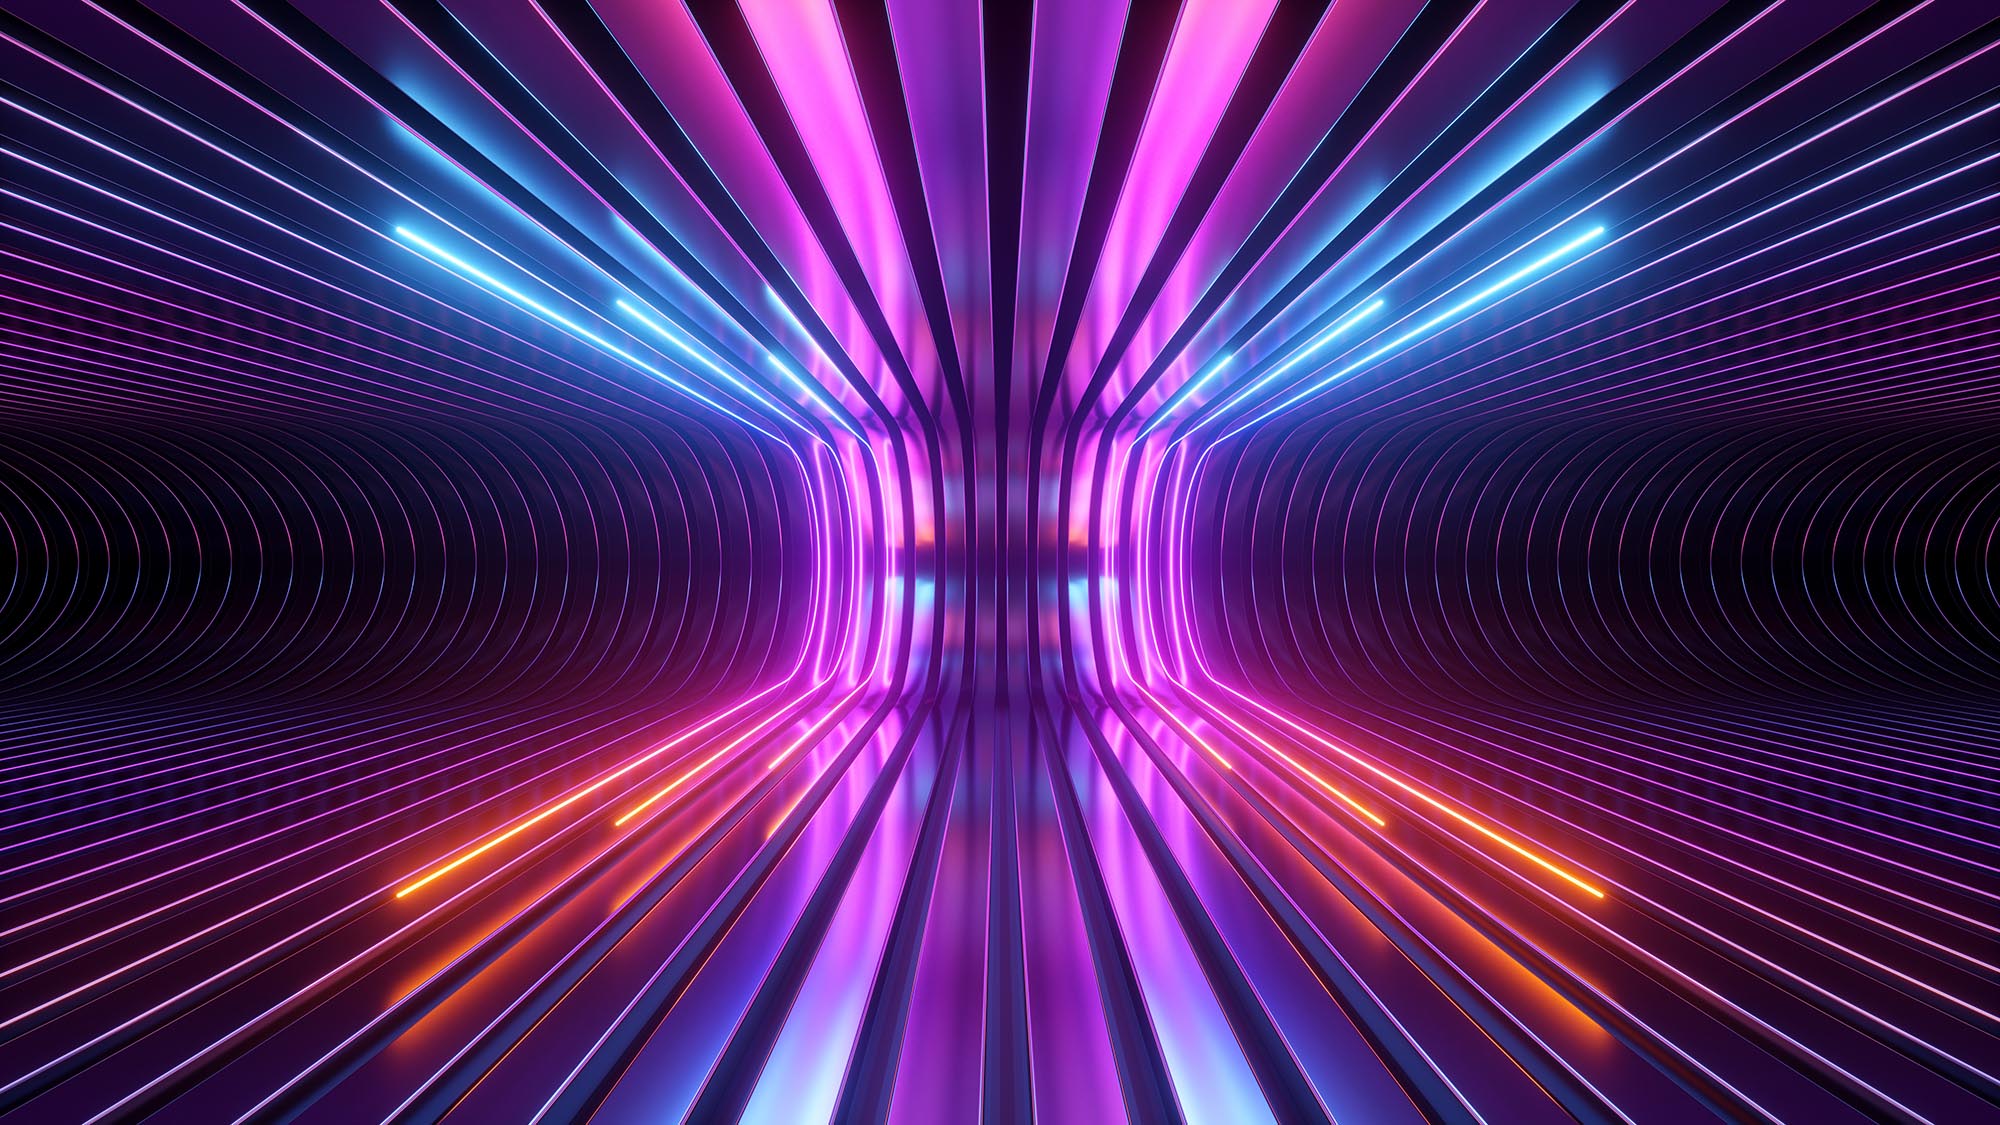 Abstract futuristic neon background. Rounded red blue lines, glowing in the dark. Ultraviolet spectrum. Cyber space